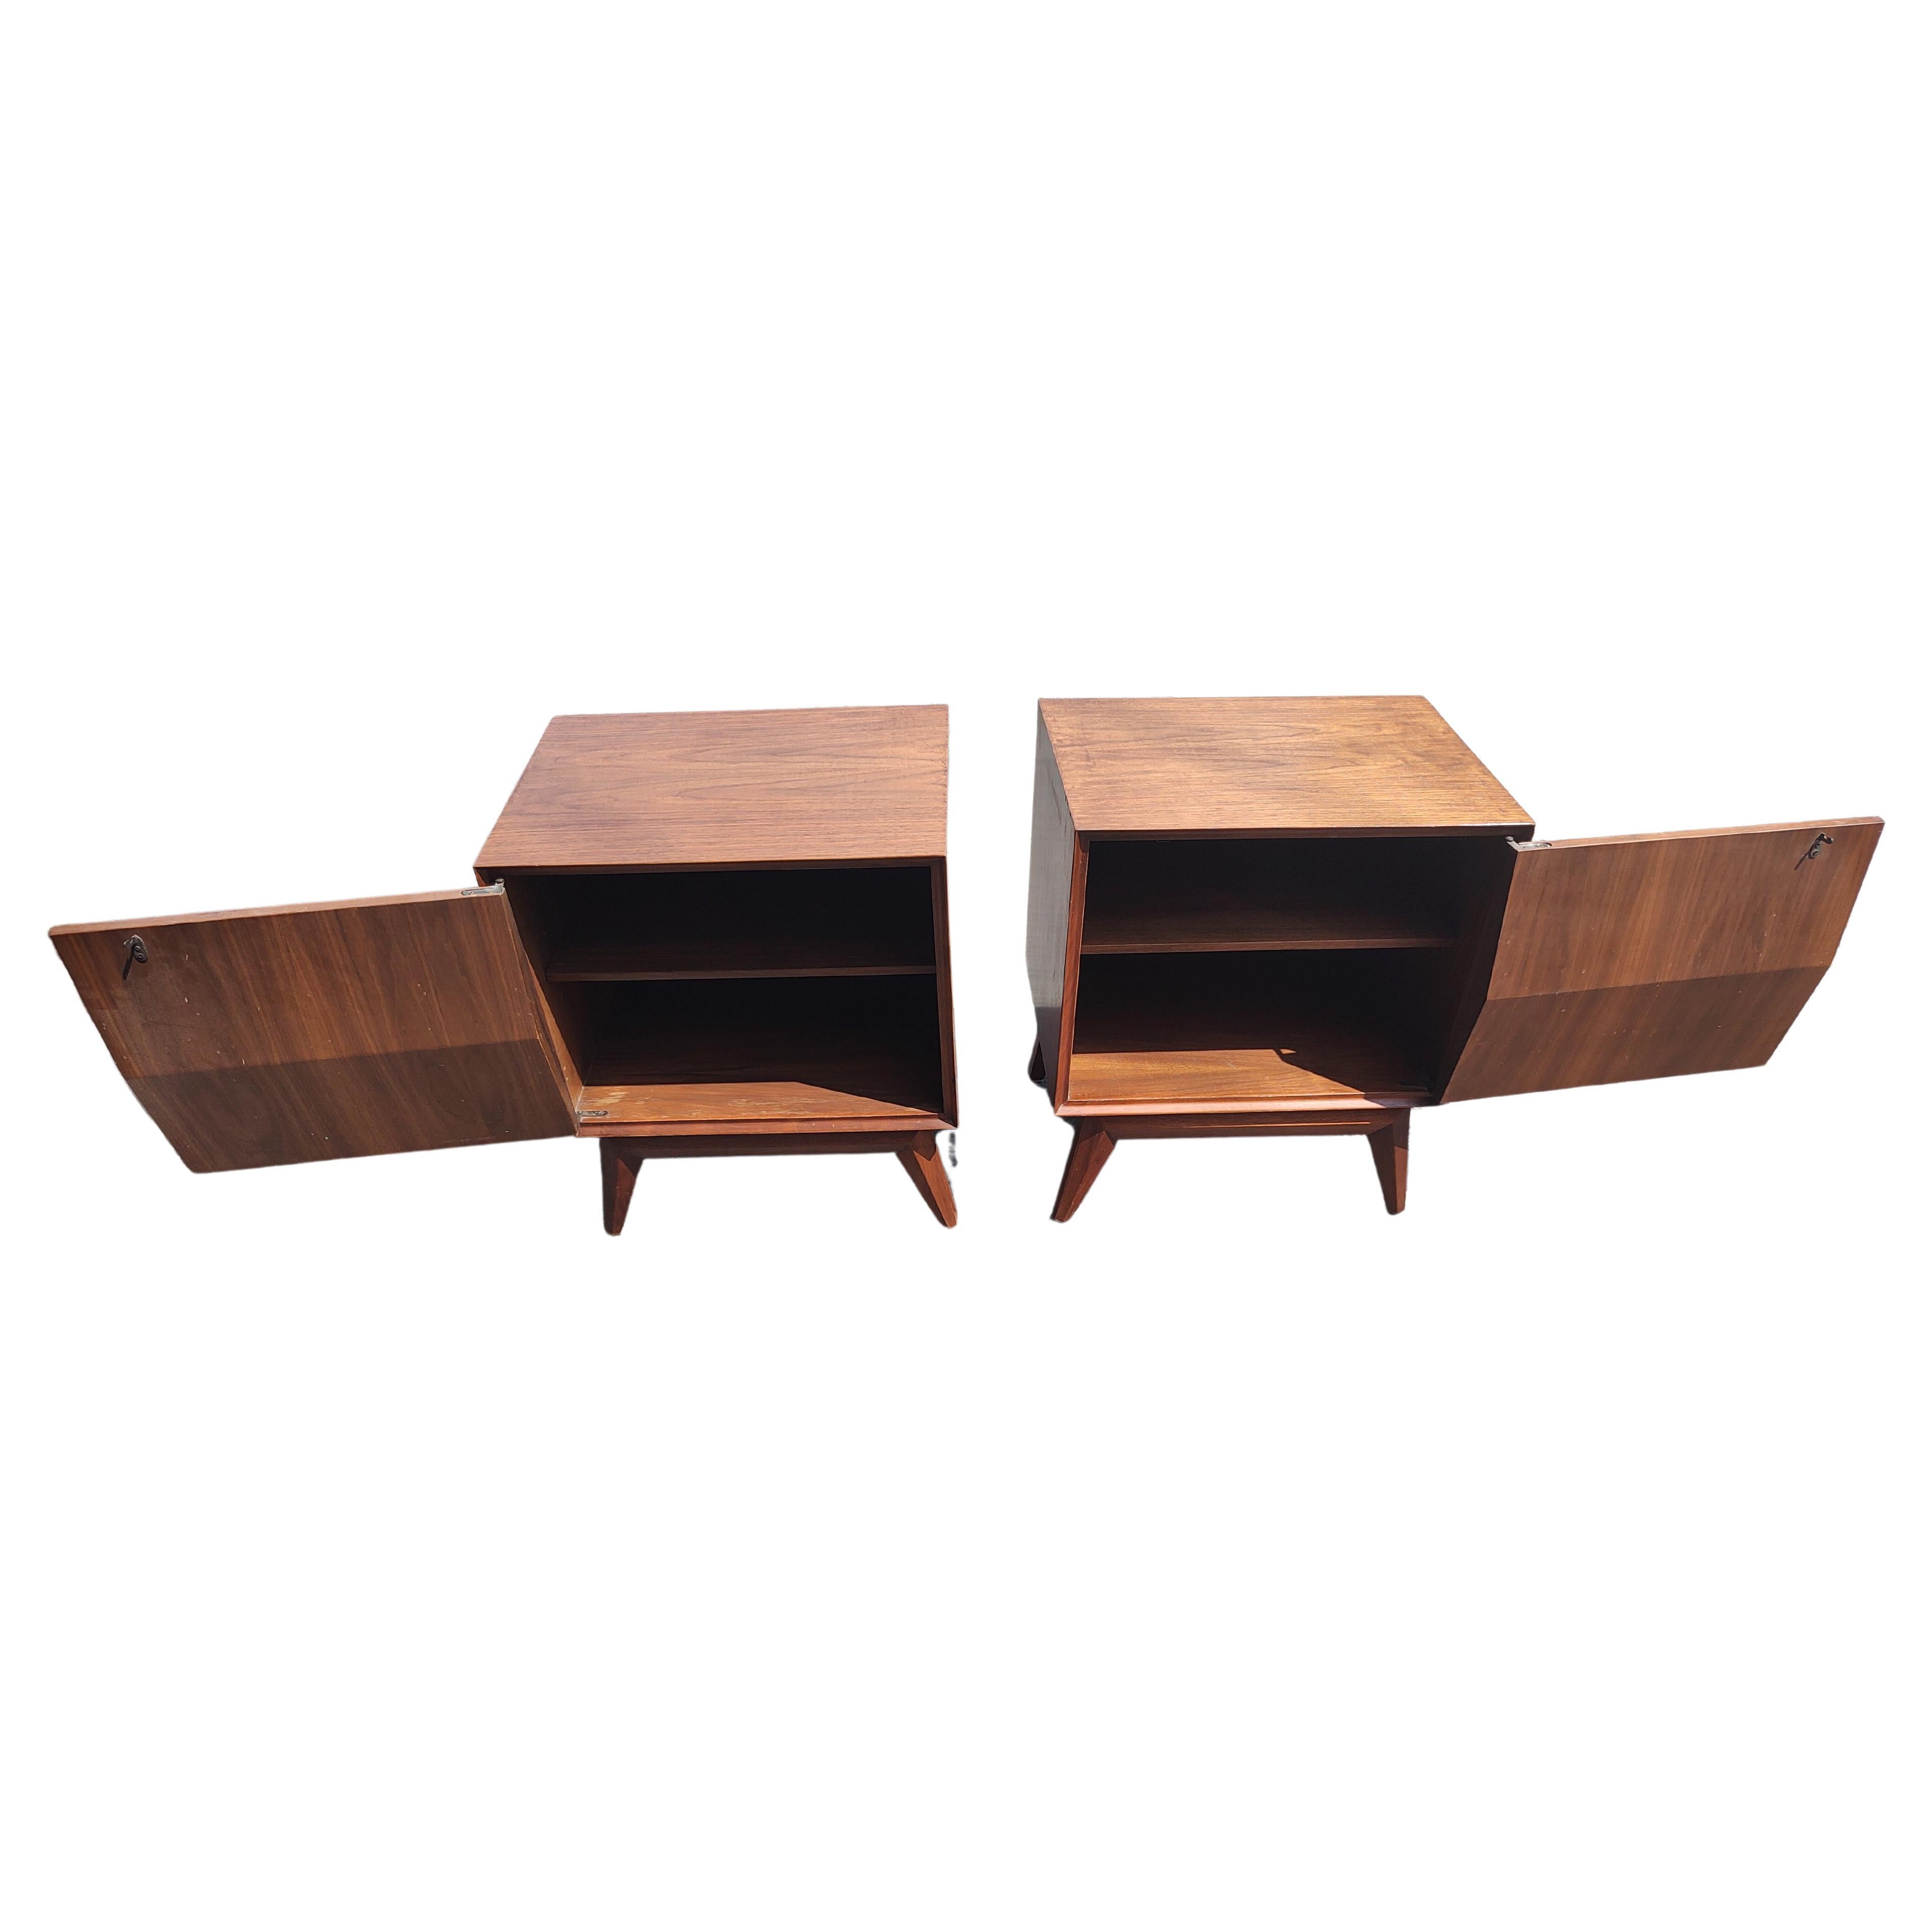 American Pair of Mid Century Modern Diamond Front Walnut Night Tables by Albert Parvin For Sale